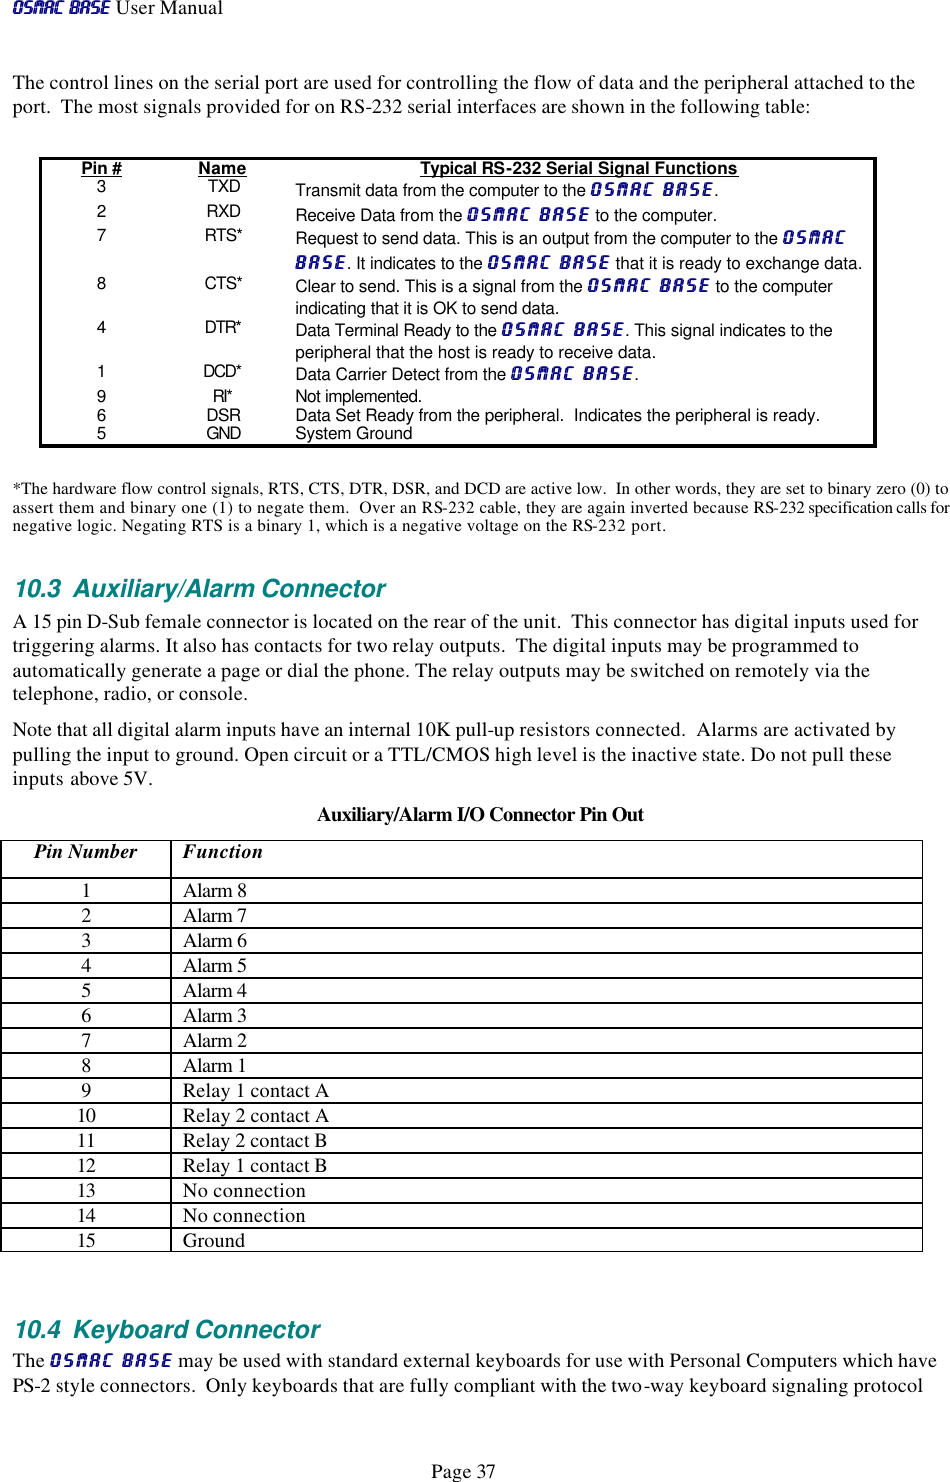 OSMAC BaseOSMAC Base User Manual      Page 37 The control lines on the serial port are used for controlling the flow of data and the peripheral attached to the port.  The most signals provided for on RS-232 serial interfaces are shown in the following table: Pin # Name Typical RS-232 Serial Signal Functions 3 TXD Transmit data from the computer to the OSMAC BaseOSMAC Base. 2 RXD Receive Data from the OSMAC BaseOSMAC Base to the computer. 7 RTS* Request to send data. This is an output from the computer to the OSMAC OSMAC BaseBase. It indicates to the OSMAC BaseOSMAC Base that it is ready to exchange data.   8 CTS* Clear to send. This is a signal from the OSMAC BaseOSMAC Base to the computer indicating that it is OK to send data. 4 DTR* Data Terminal Ready to the OSMAC BaseOSMAC Base. This signal indicates to the peripheral that the host is ready to receive data.  1 DCD* Data Carrier Detect from the OSMAC BaseOSMAC Base. 9 RI* Not implemented.   6 DSR Data Set Ready from the peripheral.  Indicates the peripheral is ready. 5 GND System Ground  *The hardware flow control signals, RTS, CTS, DTR, DSR, and DCD are active low.  In other words, they are set to binary zero (0) to assert them and binary one (1) to negate them.  Over an RS-232 cable, they are again inverted because RS-232 specification calls for negative logic. Negating RTS is a binary 1, which is a negative voltage on the RS-232 port.   10.3 Auxiliary/Alarm Connector A 15 pin D-Sub female connector is located on the rear of the unit.  This connector has digital inputs used for triggering alarms. It also has contacts for two relay outputs.  The digital inputs may be programmed to automatically generate a page or dial the phone. The relay outputs may be switched on remotely via the telephone, radio, or console.  Note that all digital alarm inputs have an internal 10K pull-up resistors connected.  Alarms are activated by pulling the input to ground. Open circuit or a TTL/CMOS high level is the inactive state. Do not pull these inputs above 5V.  Auxiliary/Alarm I/O Connector Pin Out Pin Number Function 1 Alarm 8 2 Alarm 7 3 Alarm 6 4 Alarm 5 5 Alarm 4 6 Alarm 3 7 Alarm 2 8 Alarm 1 9 Relay 1 contact A 10 Relay 2 contact A 11 Relay 2 contact B 12 Relay 1 contact B 13 No connection 14 No connection 15 Ground  10.4 Keyboard Connector The OSMAC BaseOSMAC Base may be used with standard external keyboards for use with Personal Computers which have PS-2 style connectors.  Only keyboards that are fully compliant with the two-way keyboard signaling protocol 